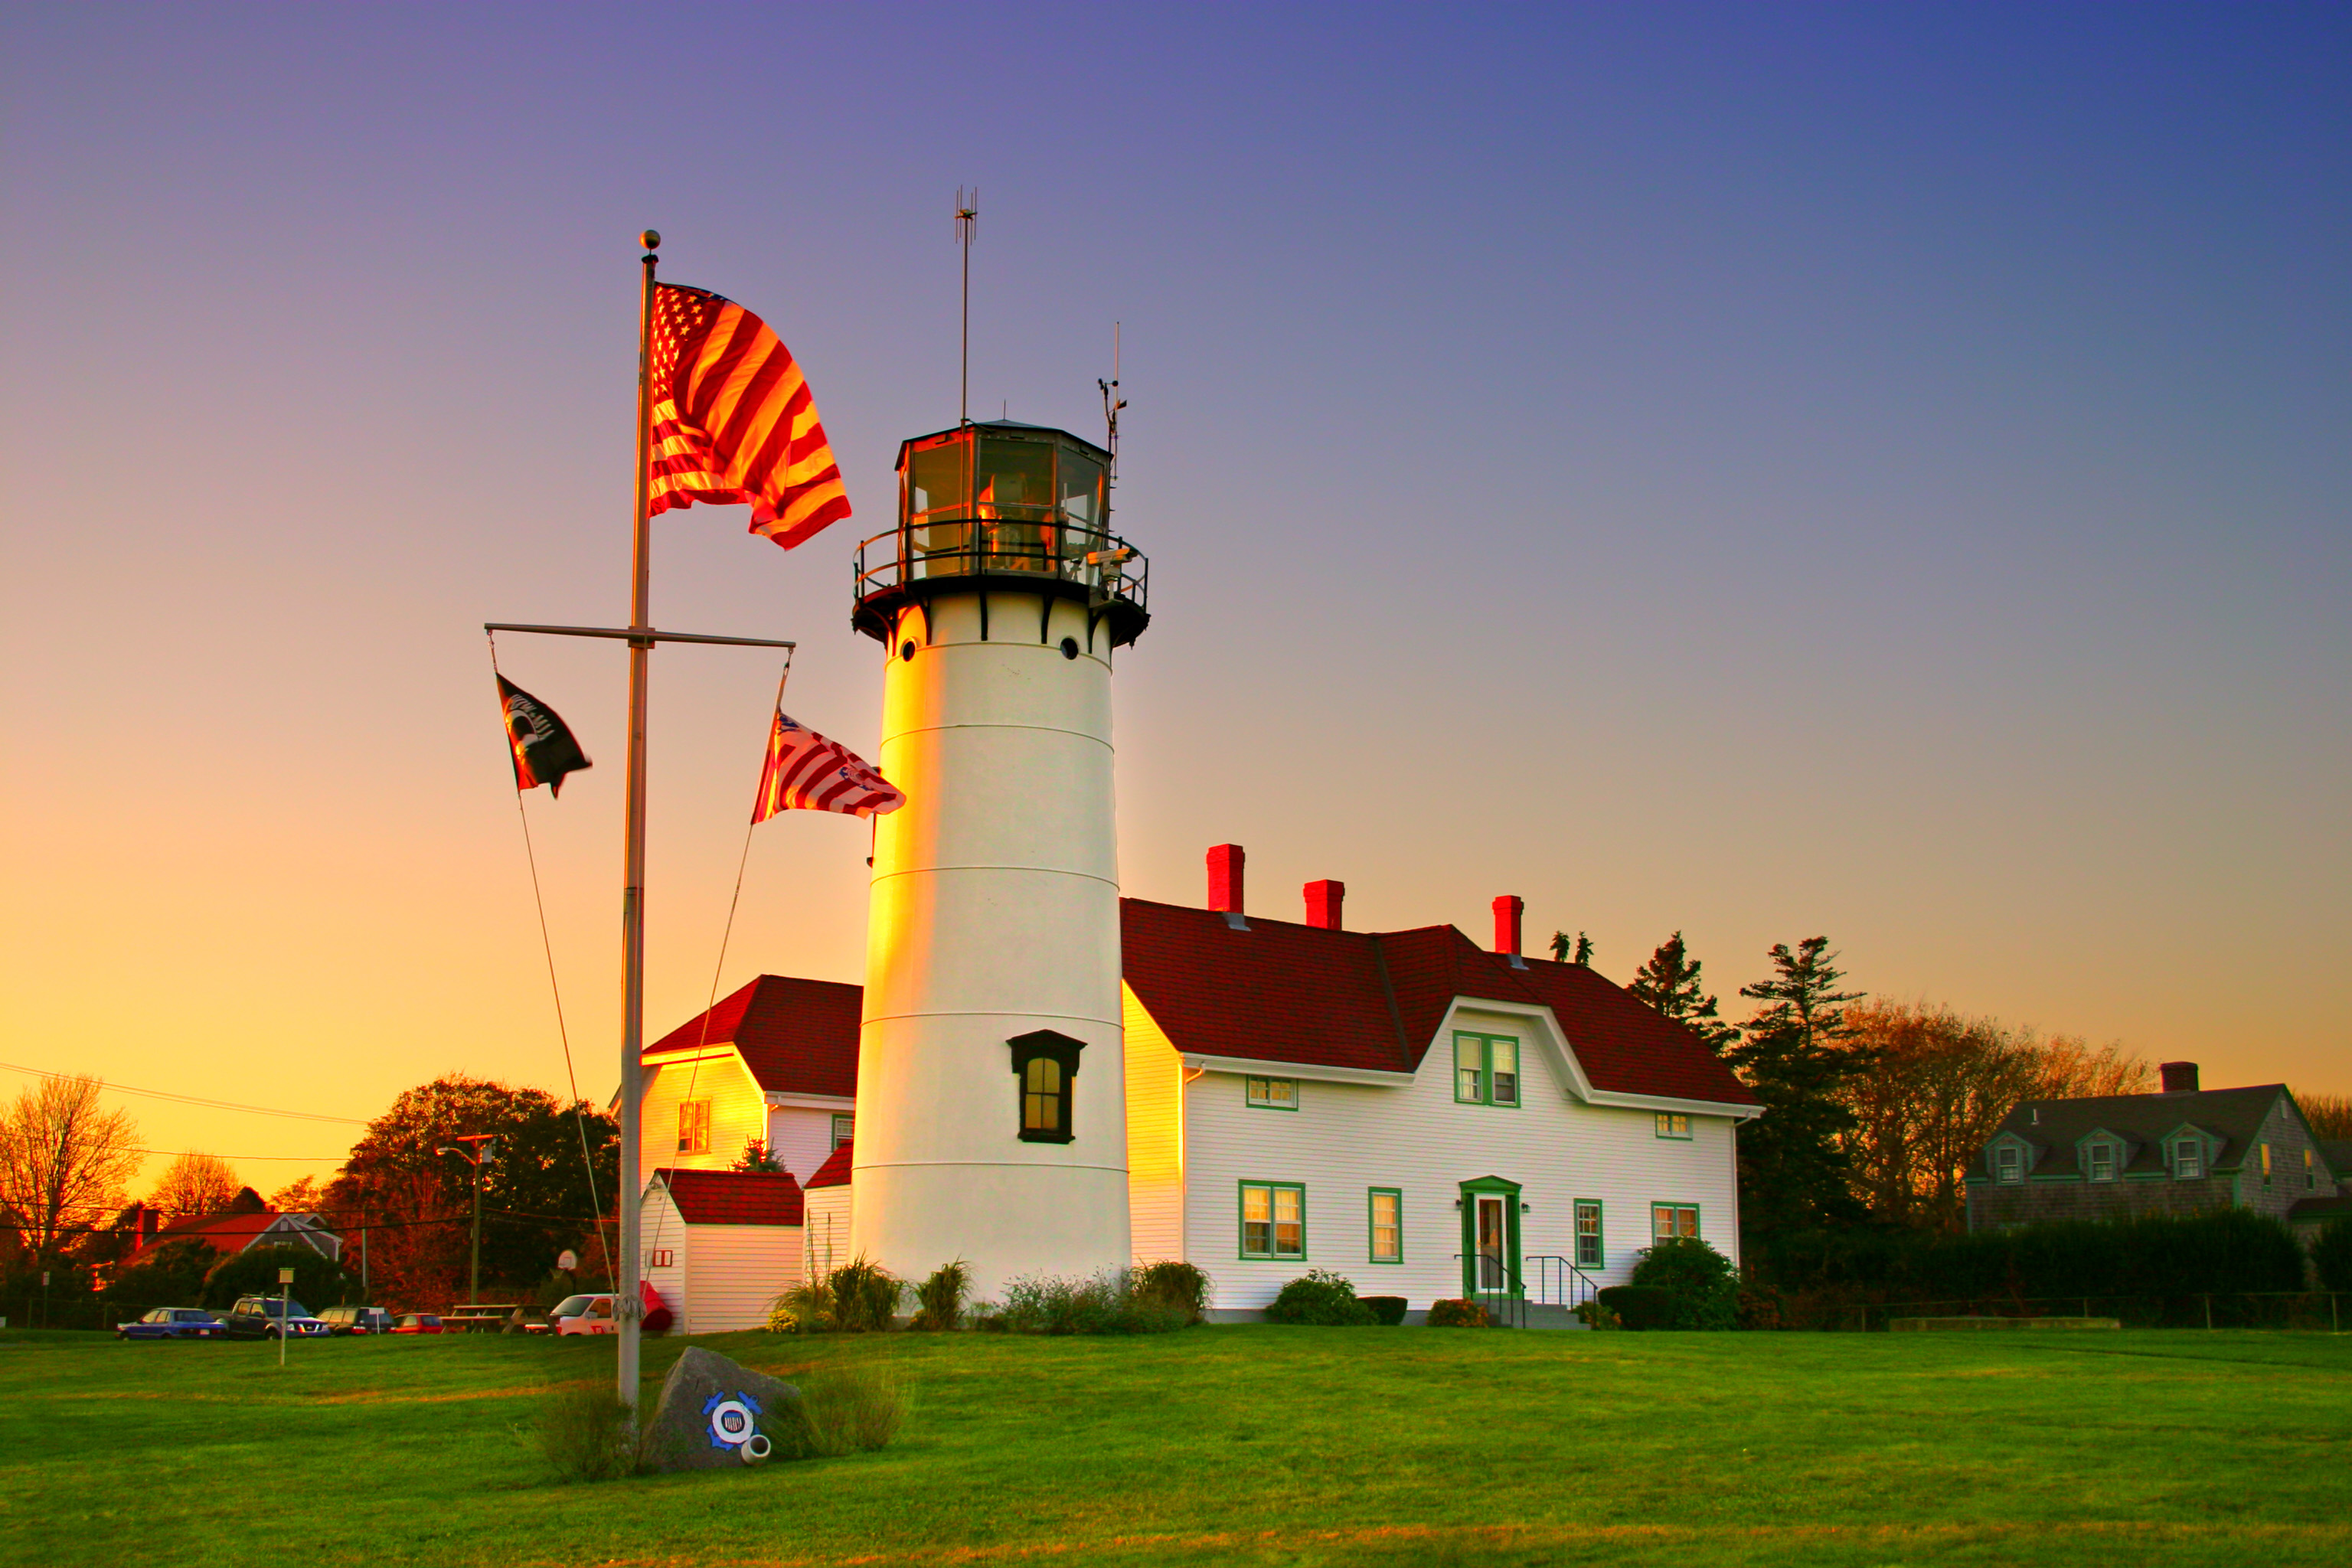 Consider These US Beach Towns for Summer Family Vacations - Chatham Lighthouse in Chatham MA - Cape Cod